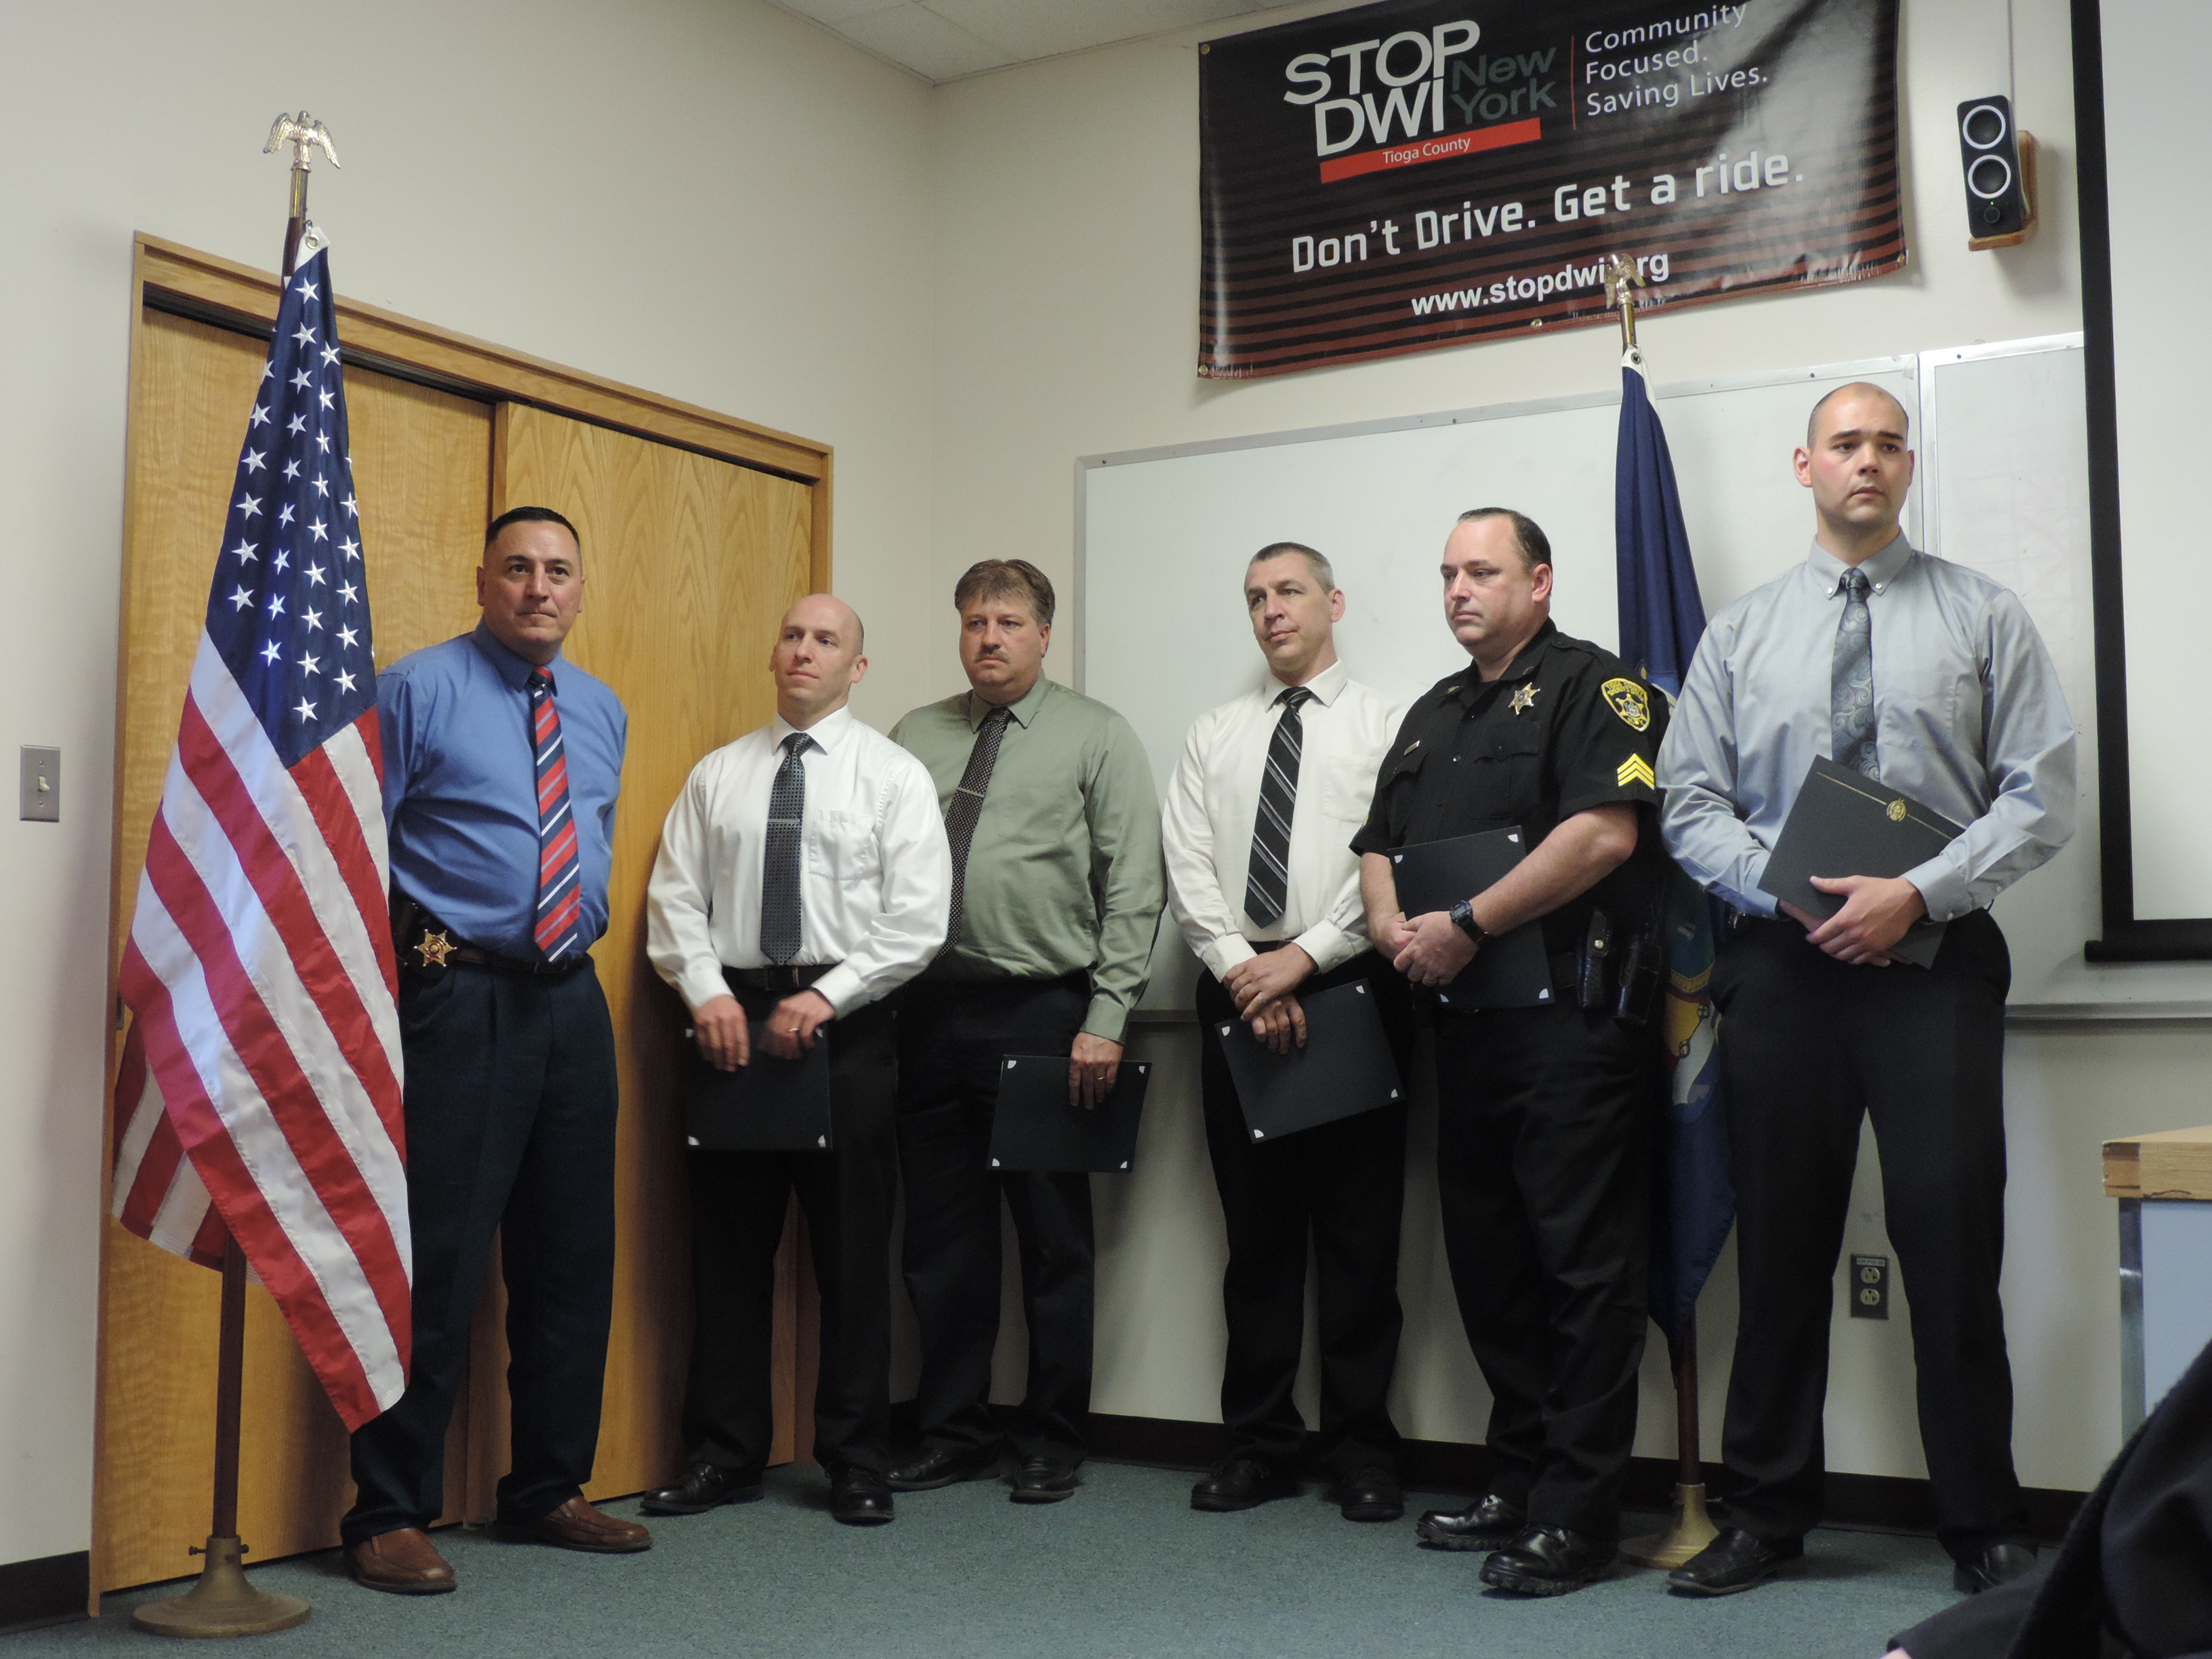 Annual award ceremony recognizes local law enforcement